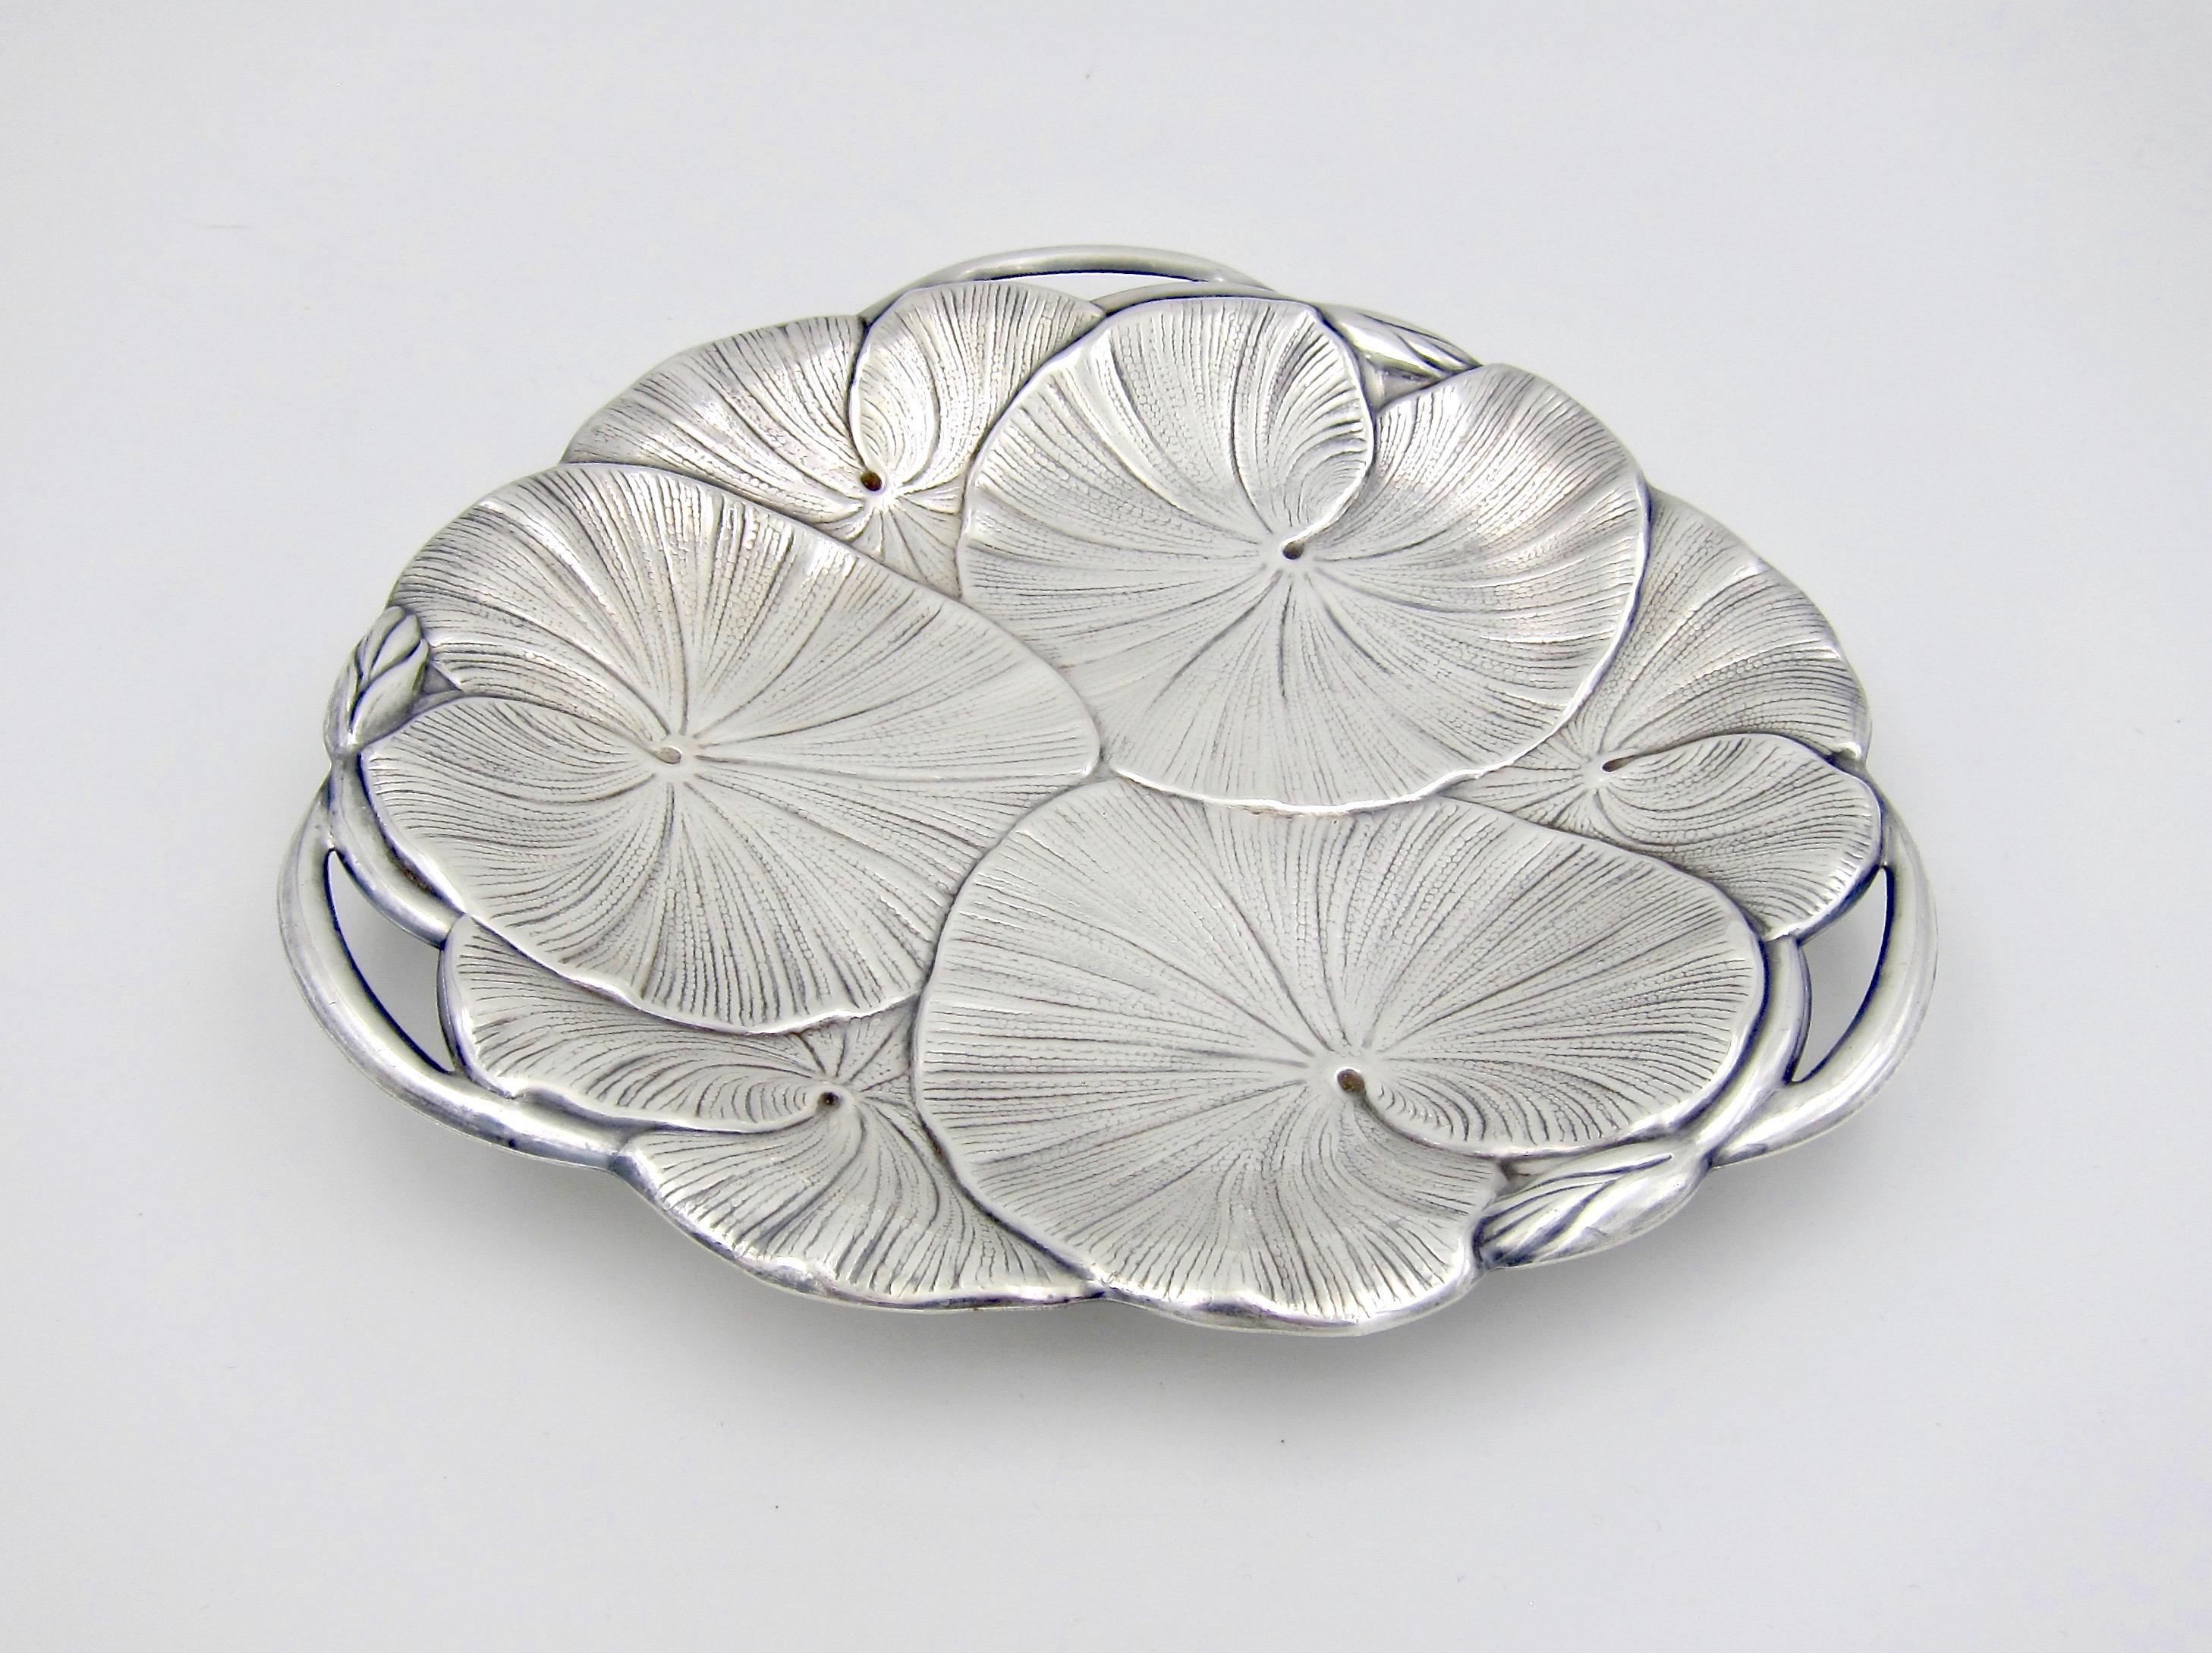 American Art Nouveau Lily Pad Tray in Silver-Plate